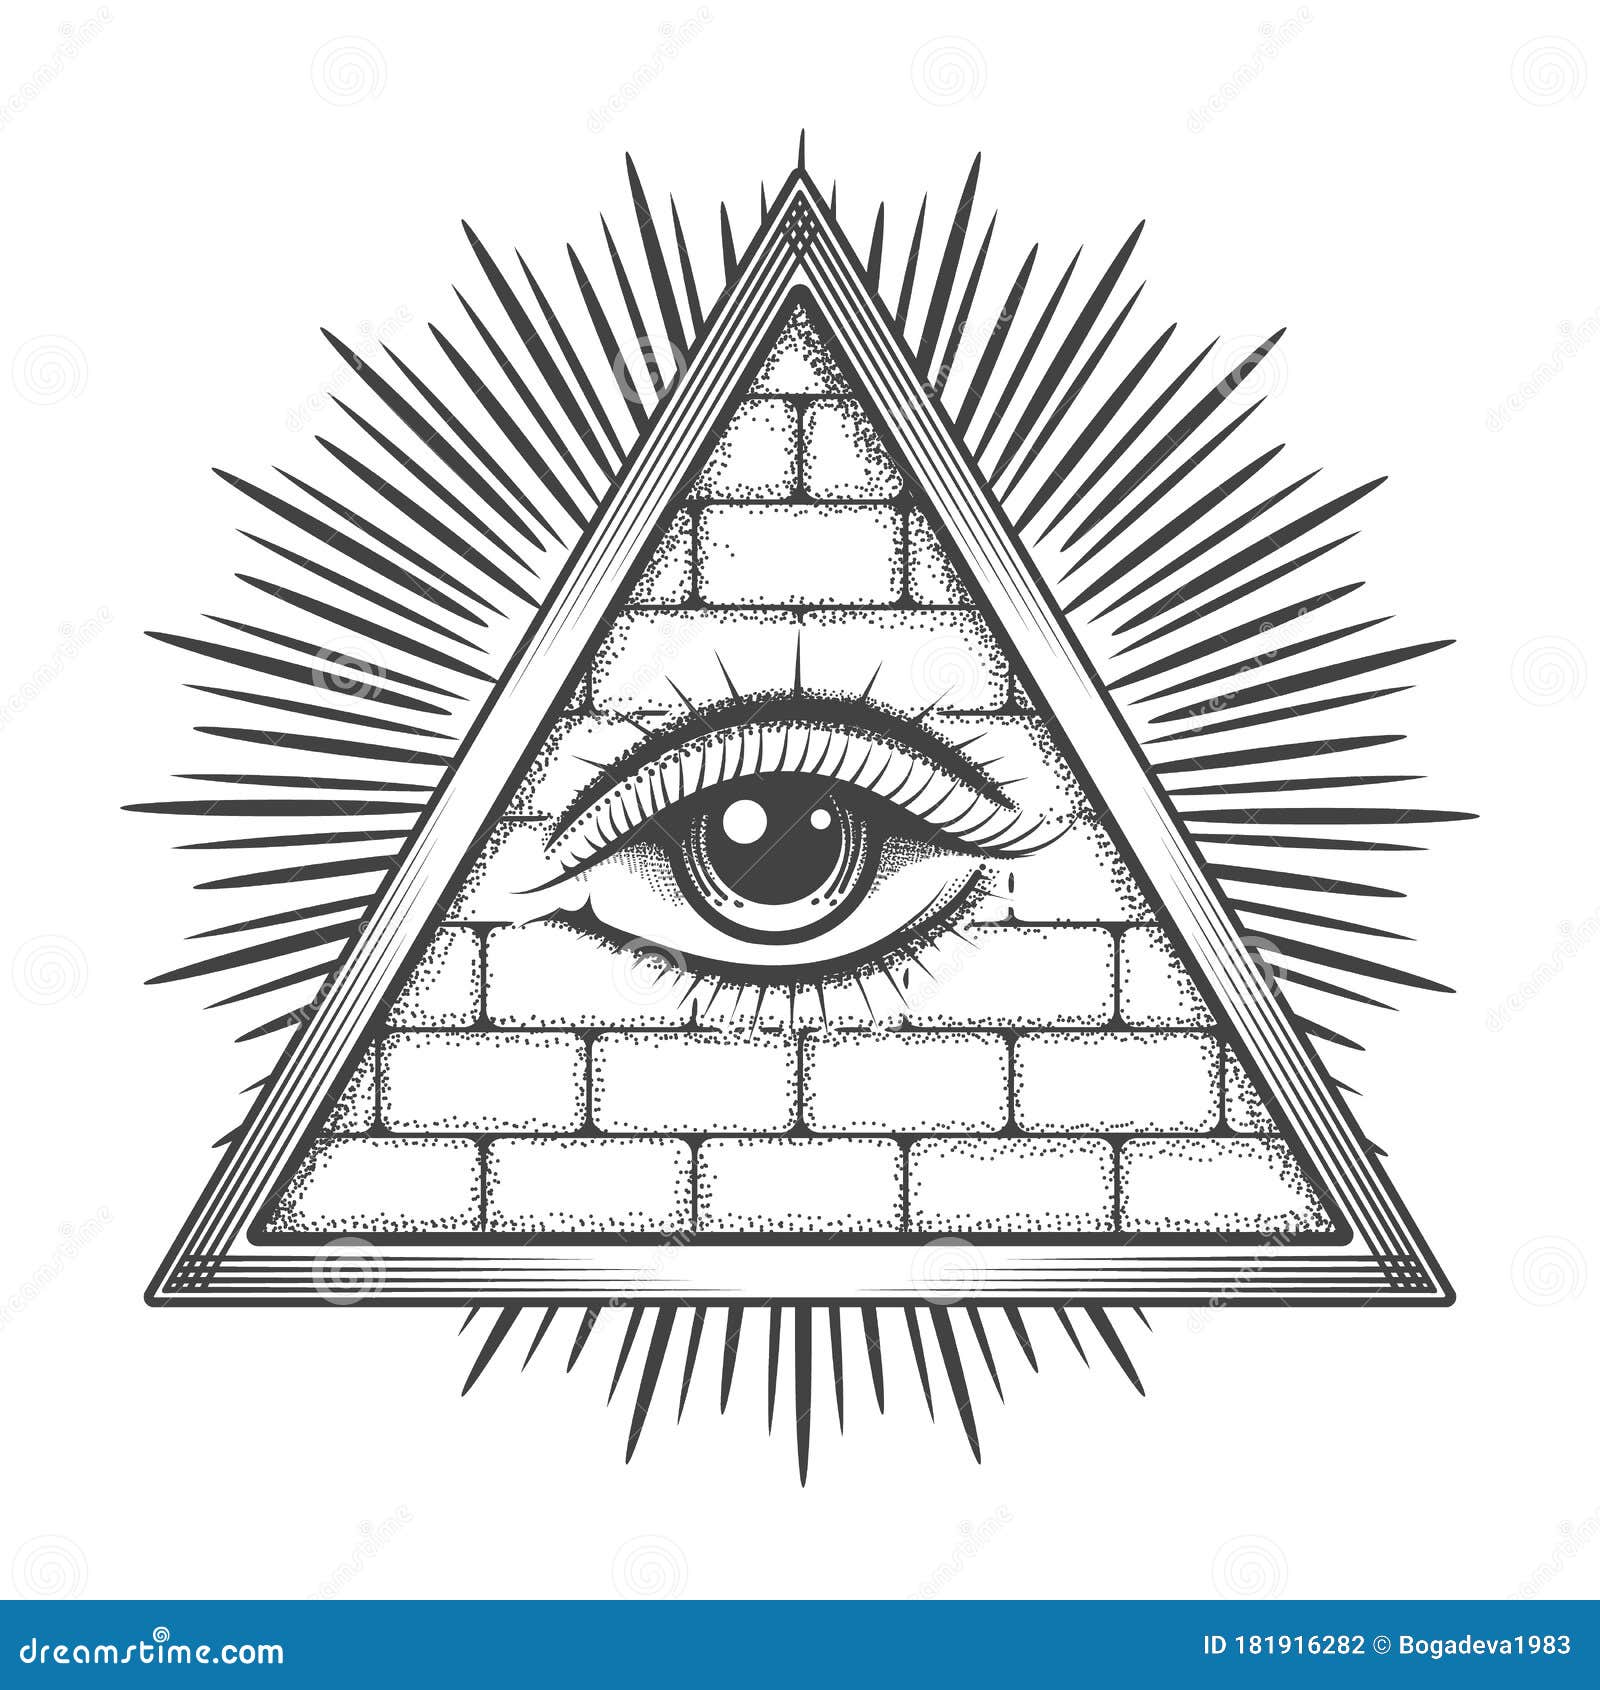 Masonic Symbol The All Seeing Eye Inside The Pyramid Triangle Icon | My ...